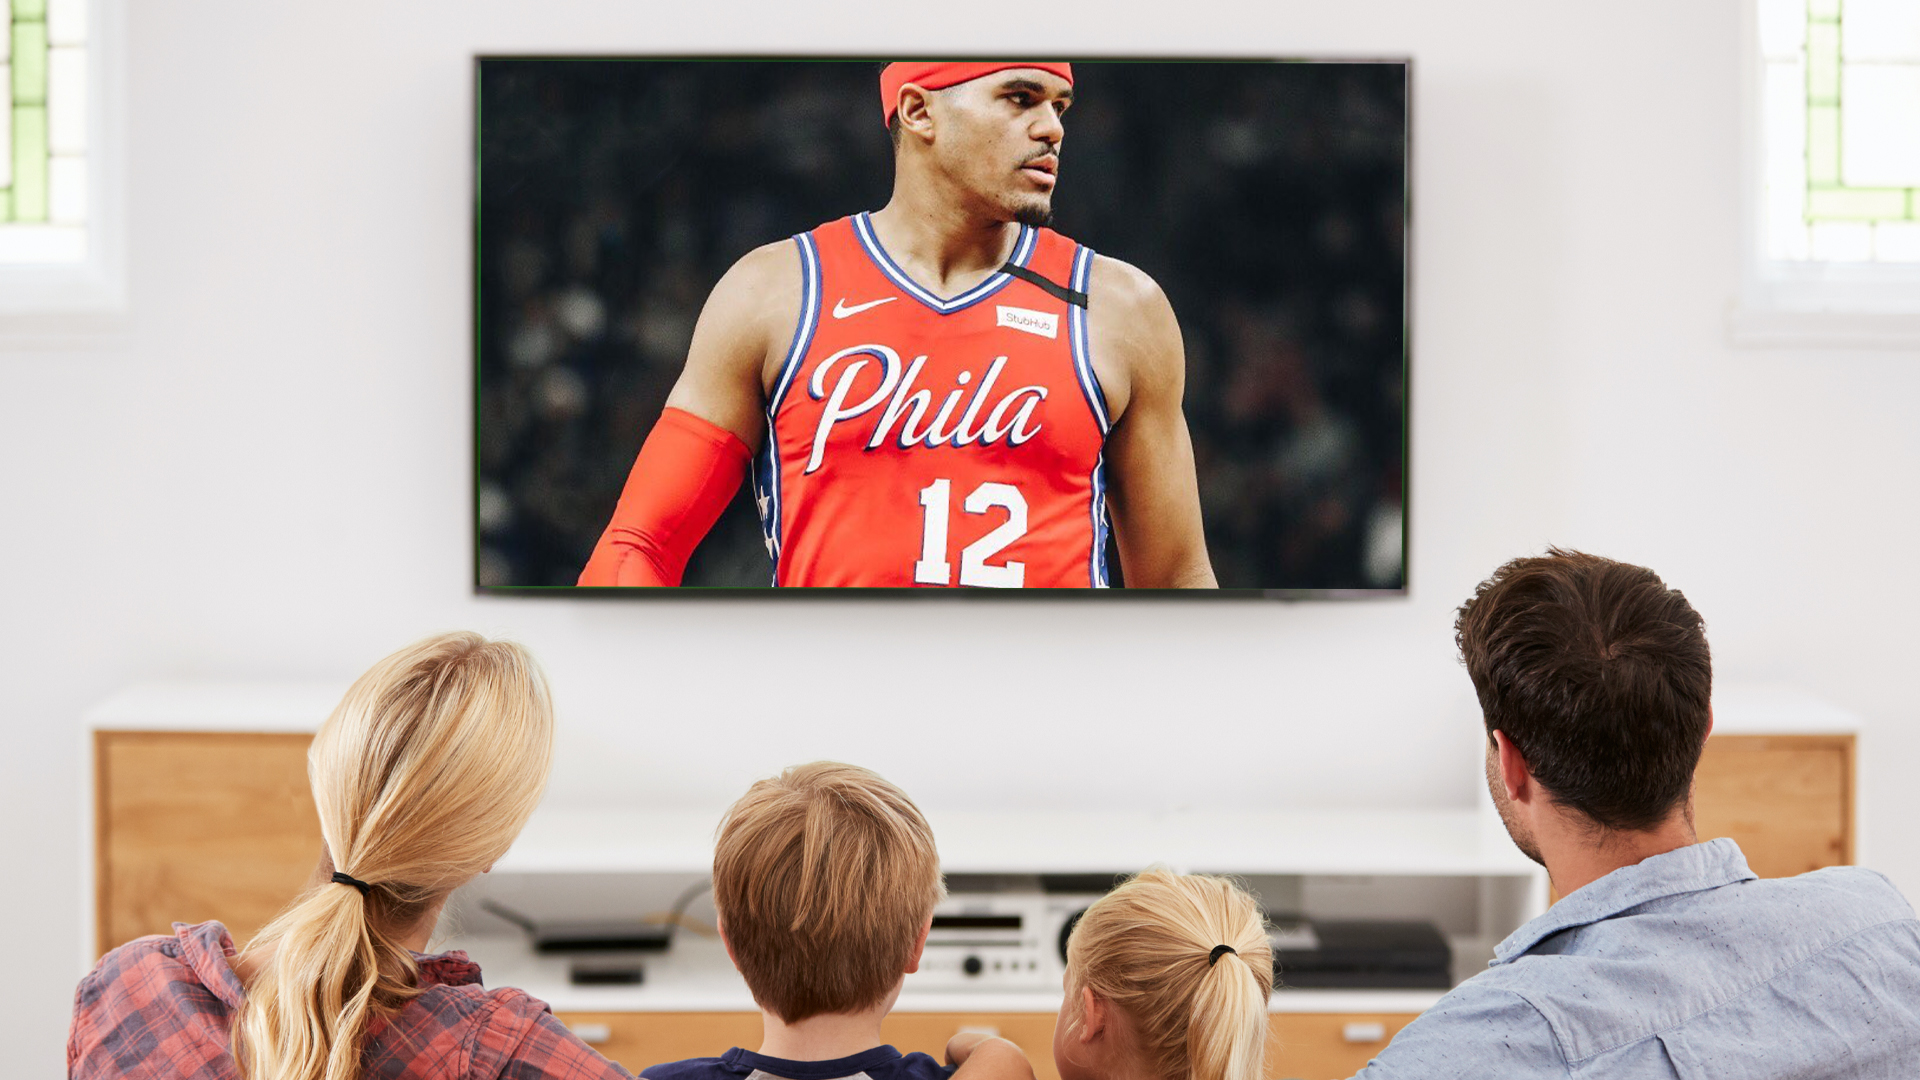 A family watching a basketball game on TV